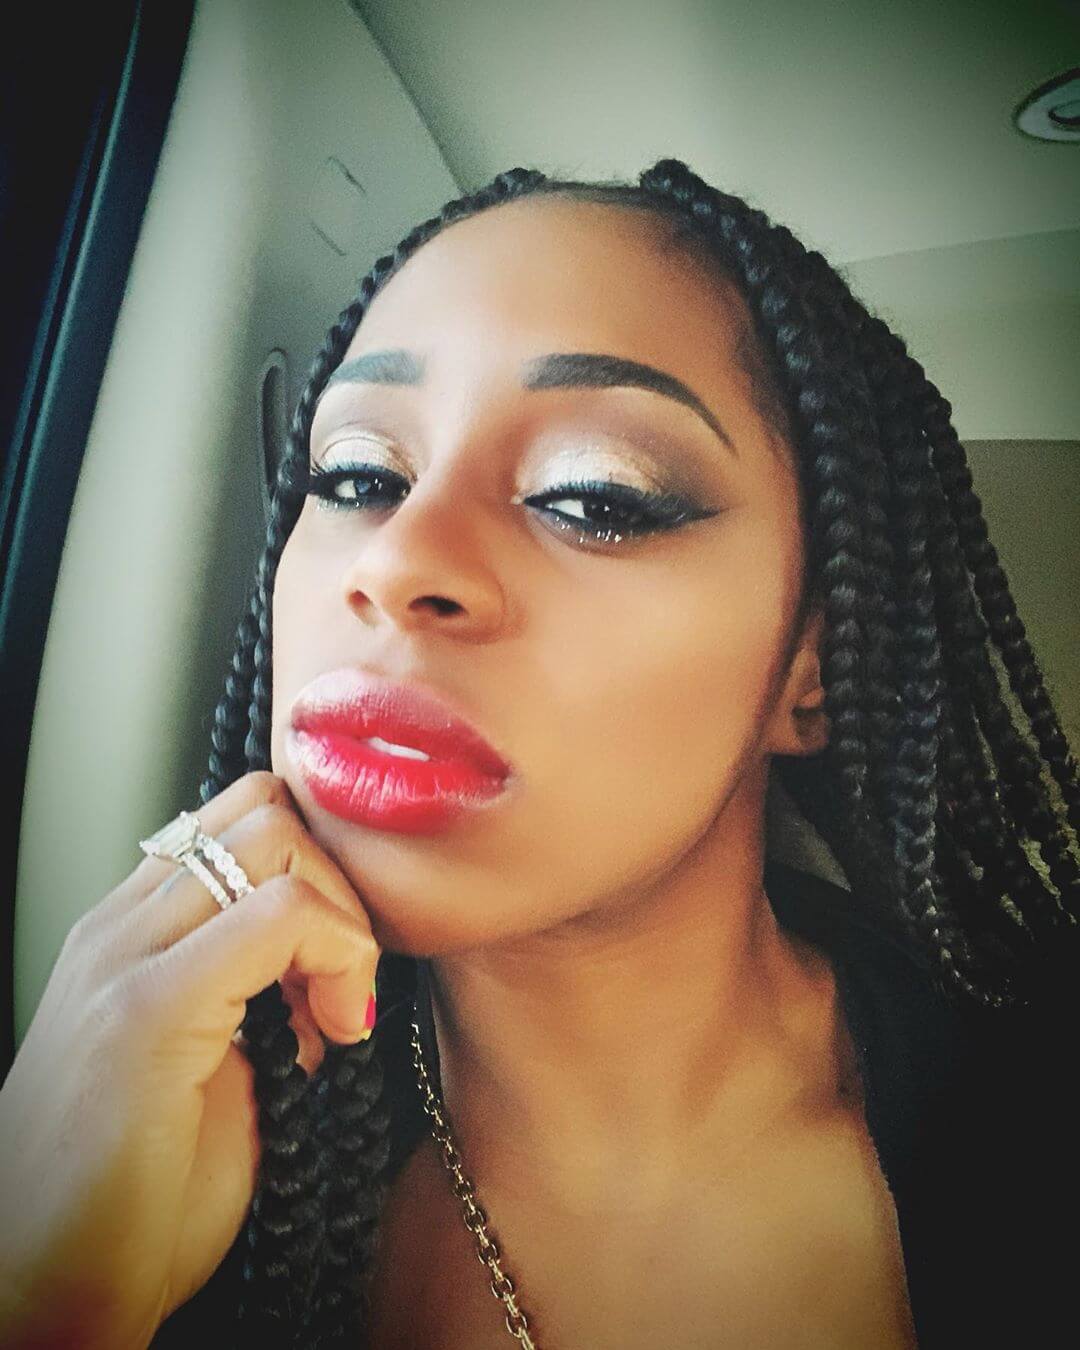 70+ Hot Pictures Of Naomi a.k.a Trinity Fatu from WWE Will Leave You Gasping For Her 570